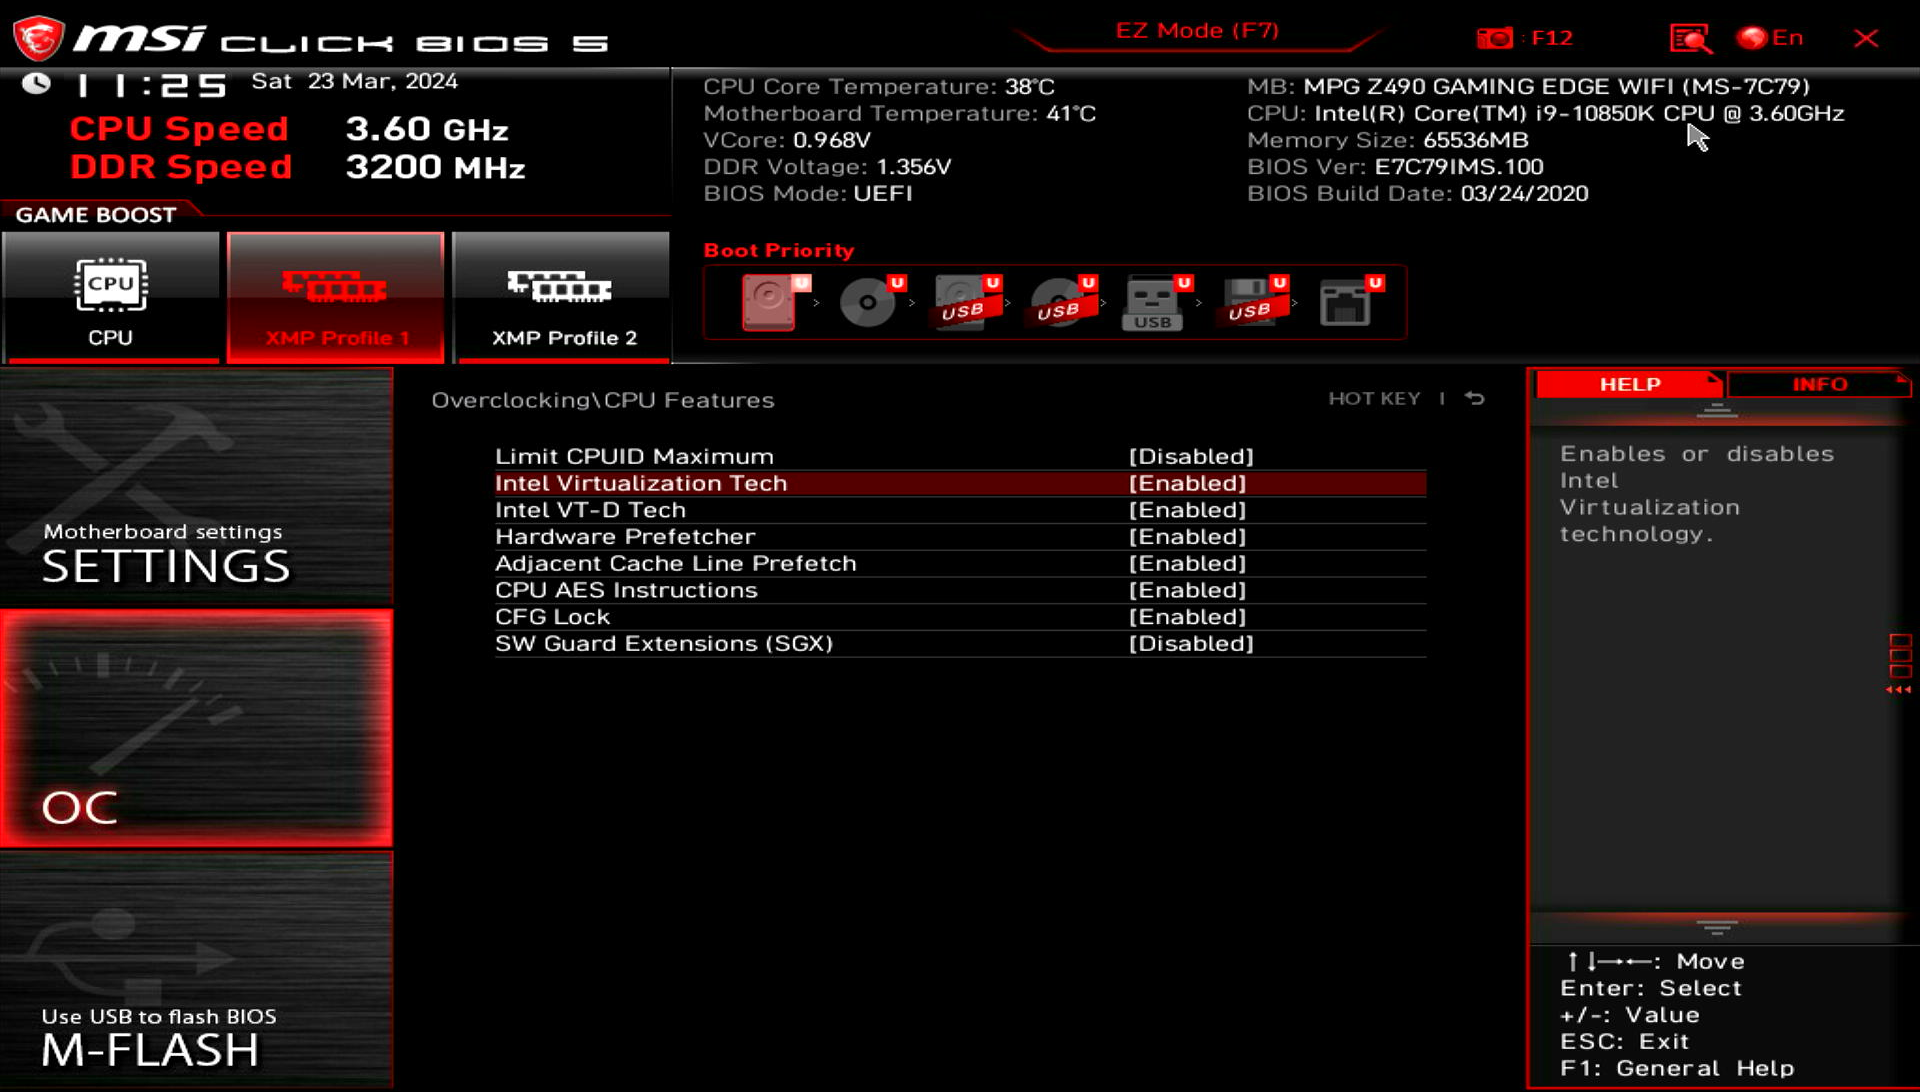 Example of Virtualization settings on MSI Z490 motherboard and Intel CPU